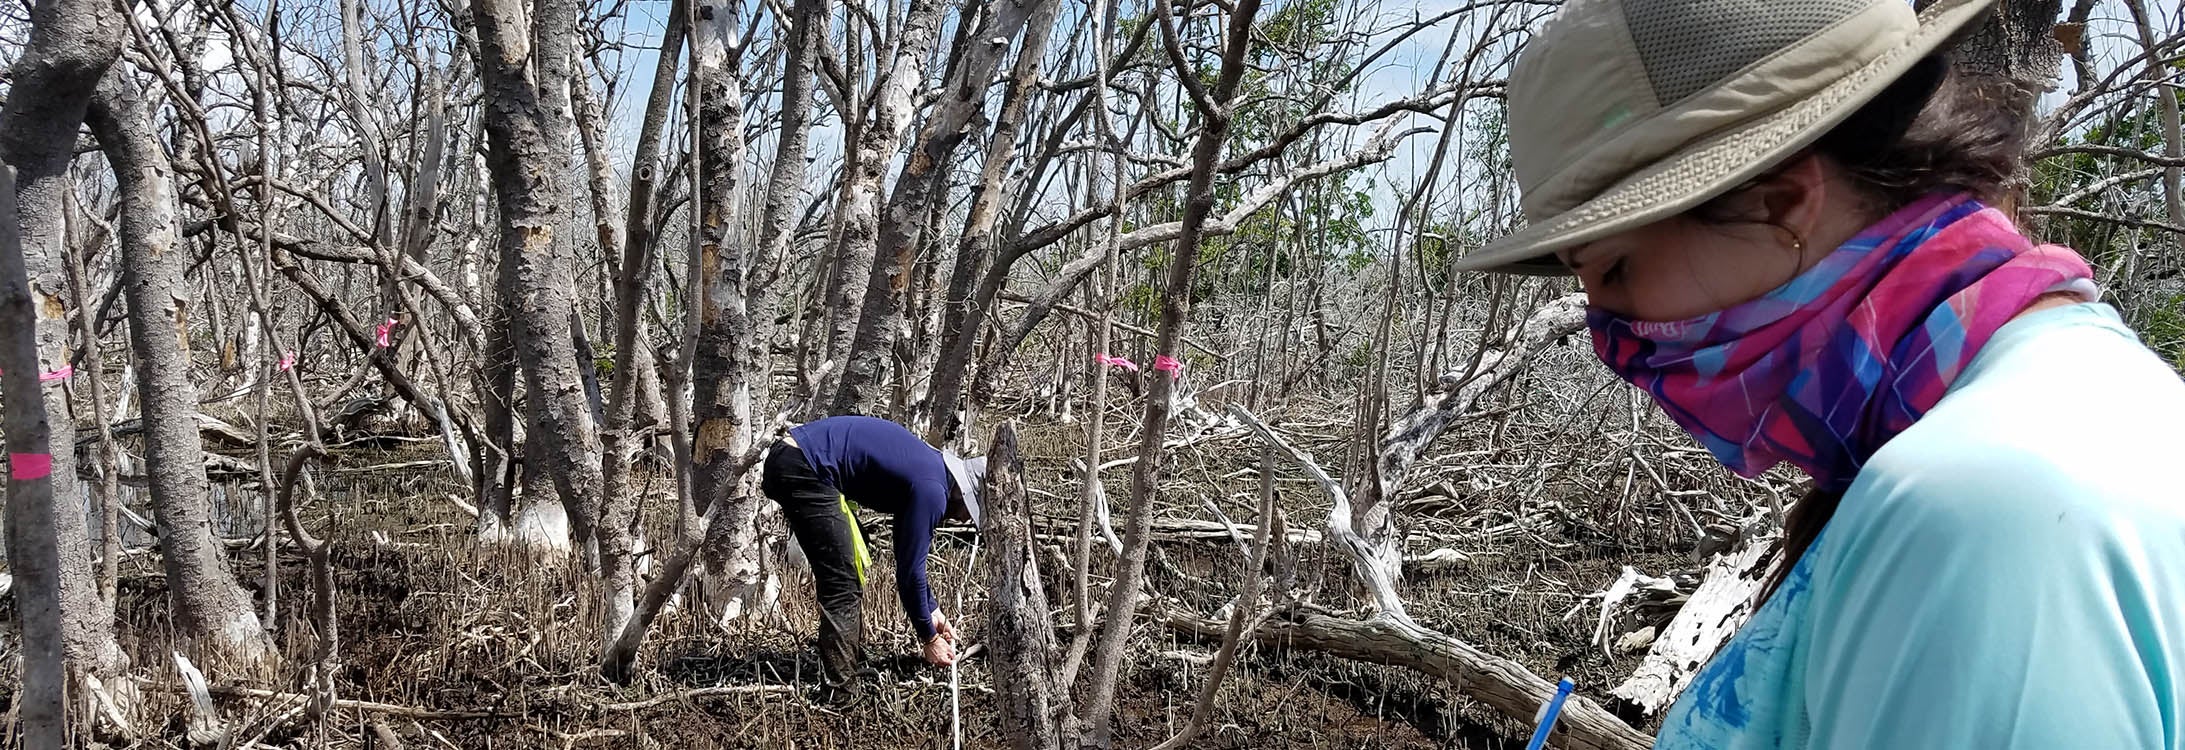 East Carolina University researchers are at the forefront of efforts to better understand the interactions between coastal ecosystems, communities and storm impacts.